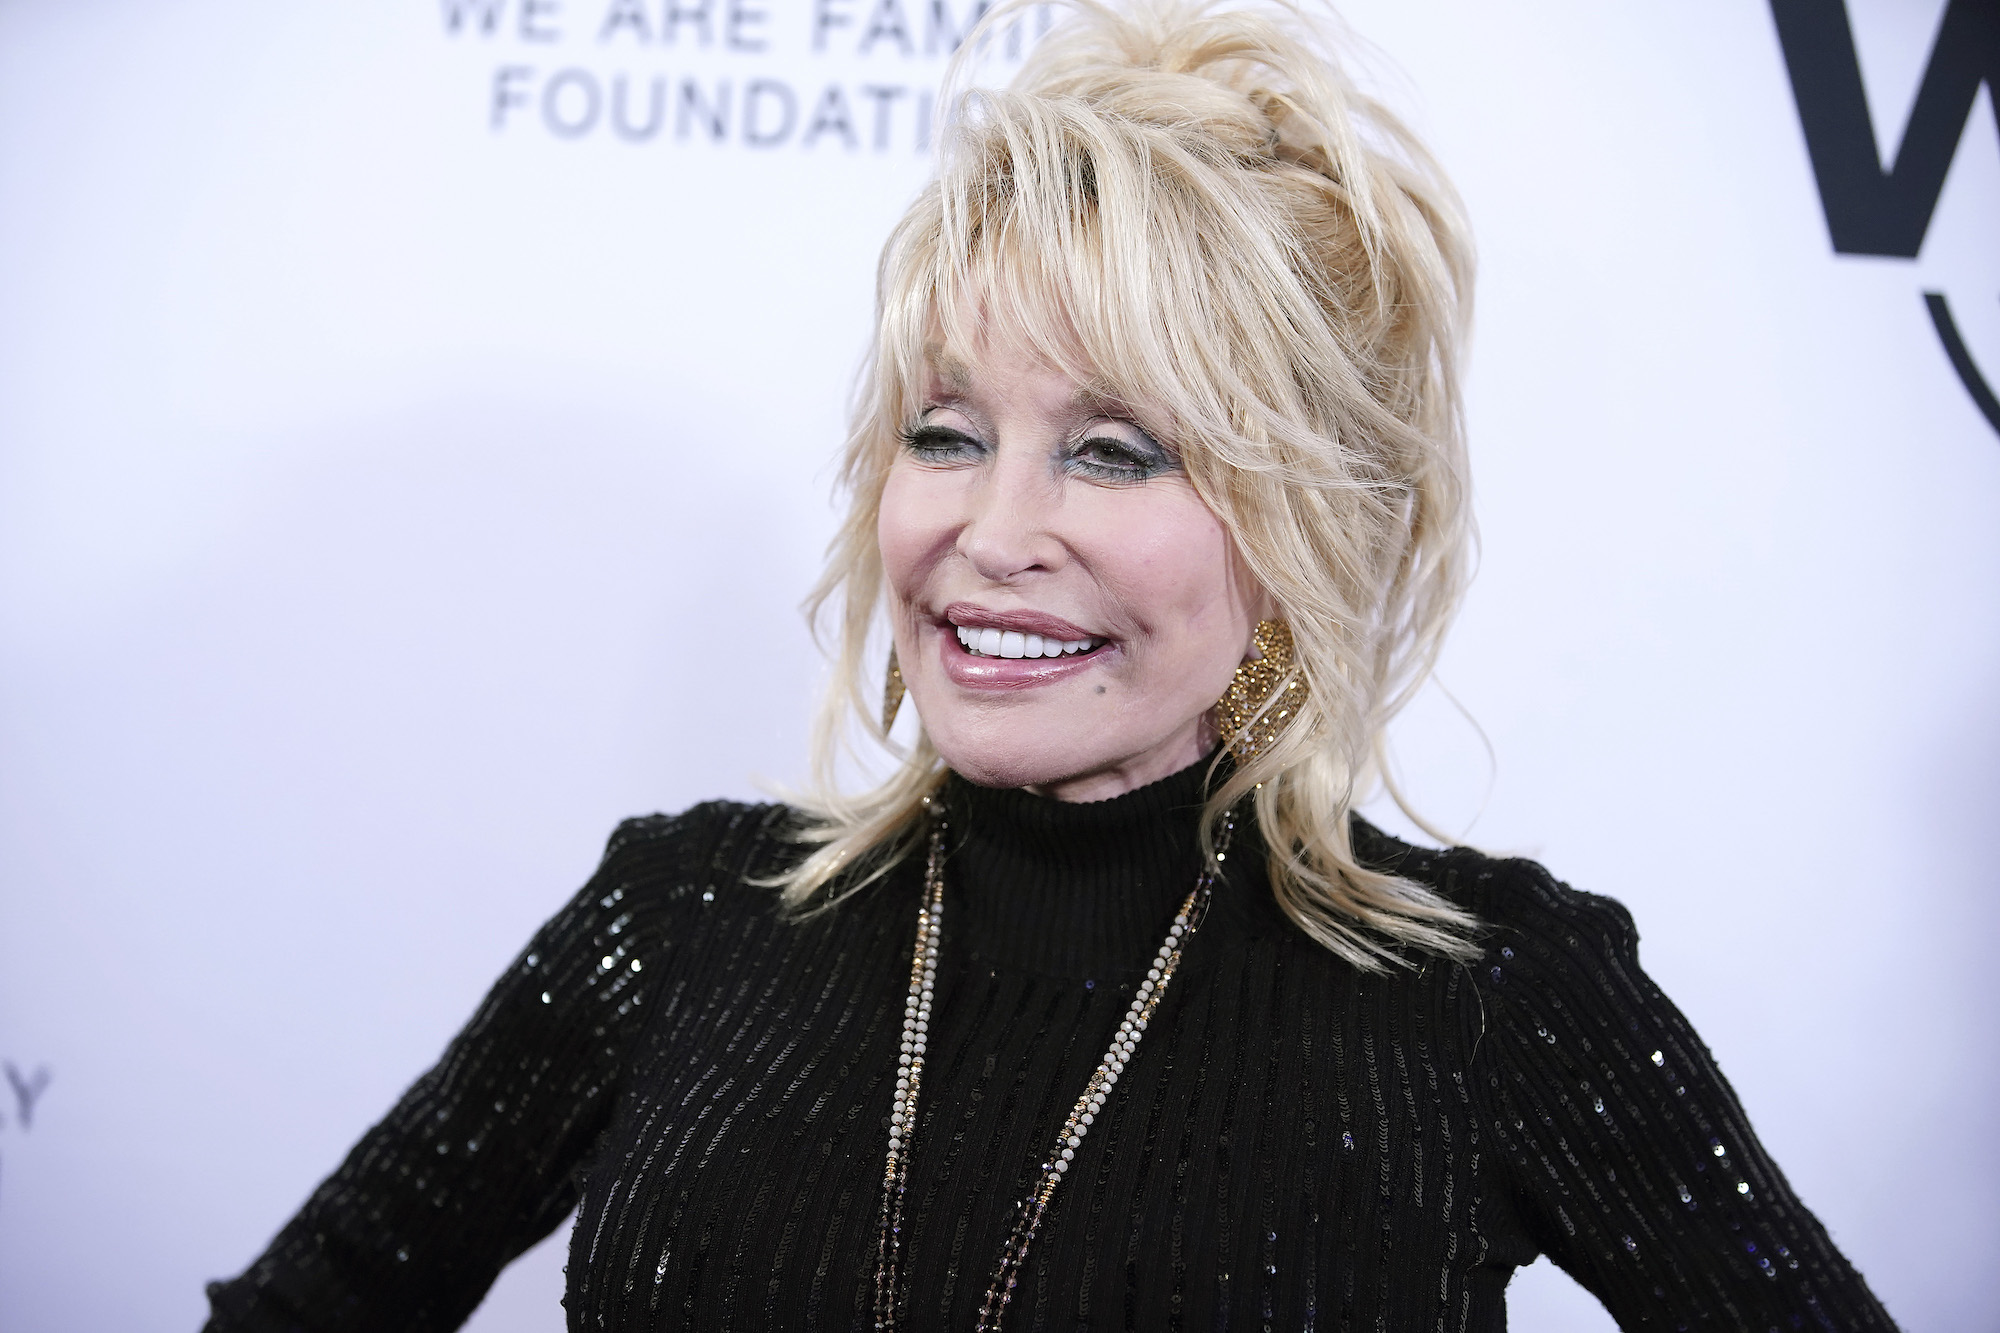 Dolly Parton attending the We Are Family Foundation event in 2019